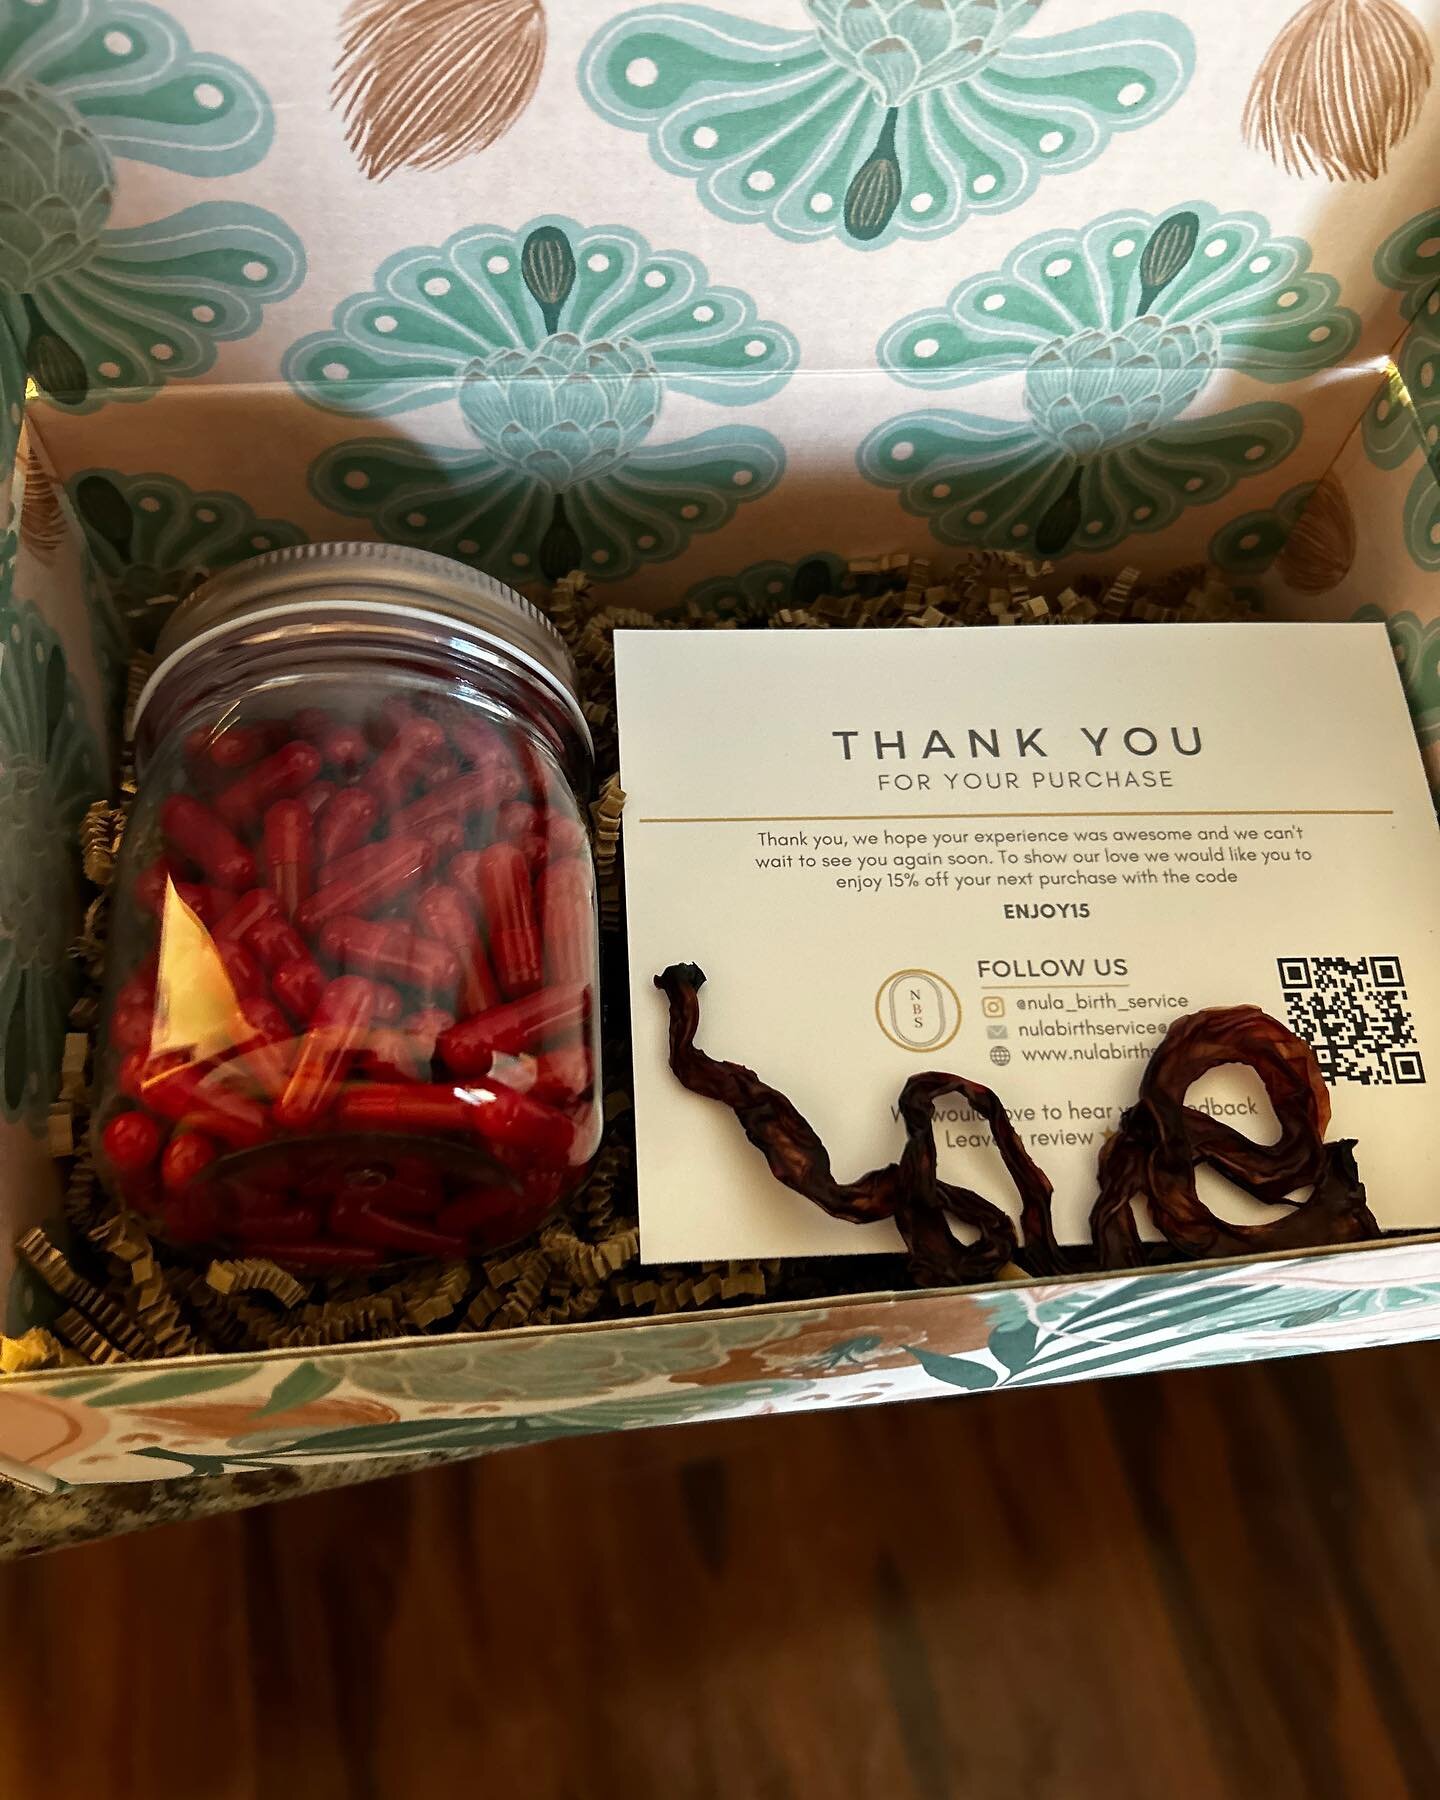 Experience the benefits of placenta encapsulation with Nula Birth Services in Murrieta, California. Our freeze-dried placenta service is designed to help new moms navigate postpartum recovery, increase milk supply, and balance hormones. Let us provid